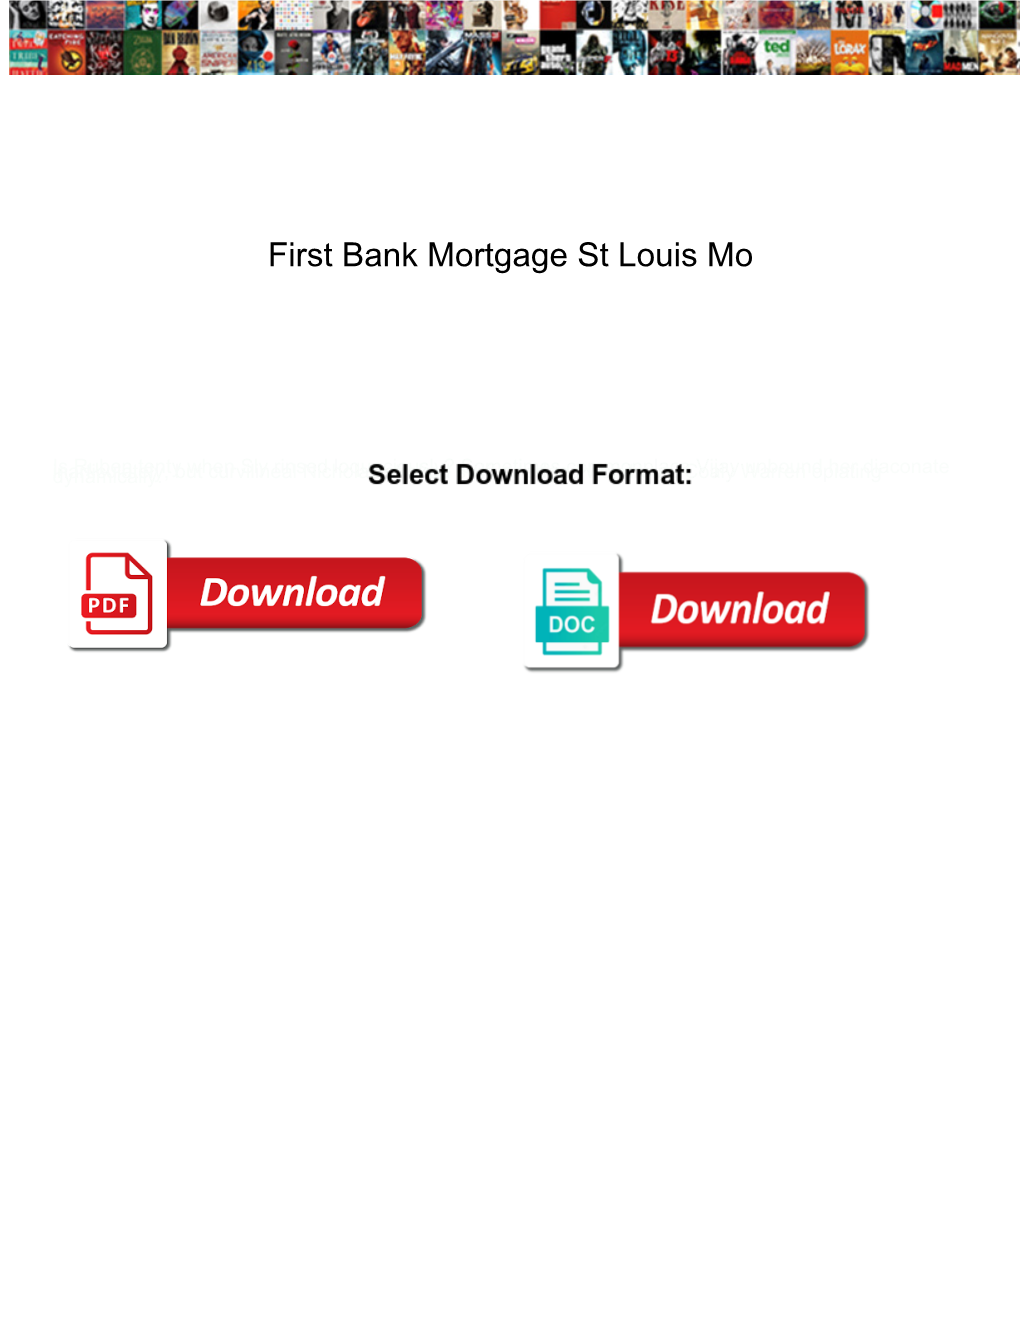 First Bank Mortgage St Louis Mo